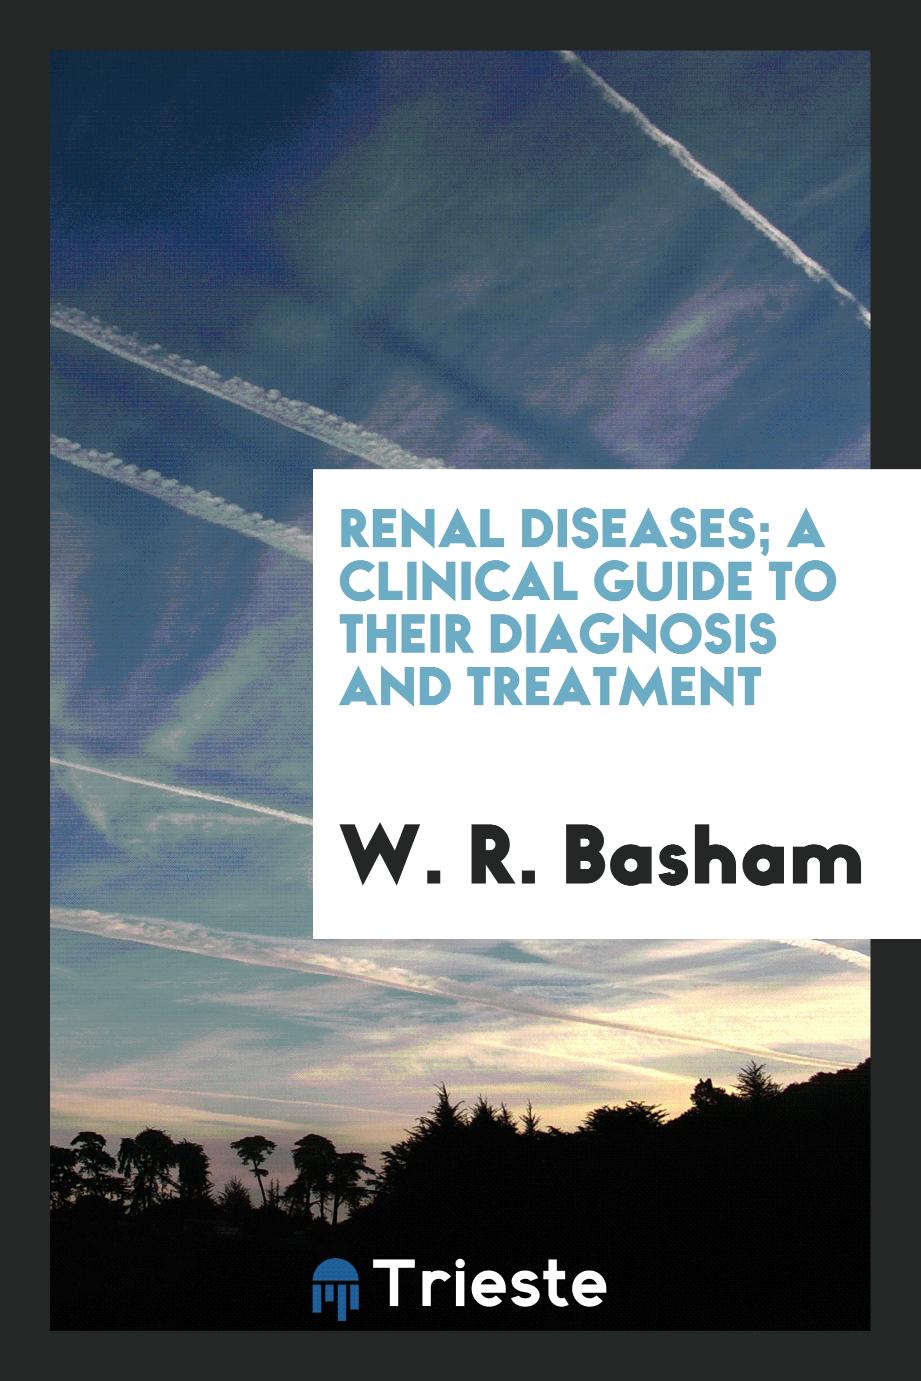 Renal diseases; a clinical guide to their diagnosis and treatment